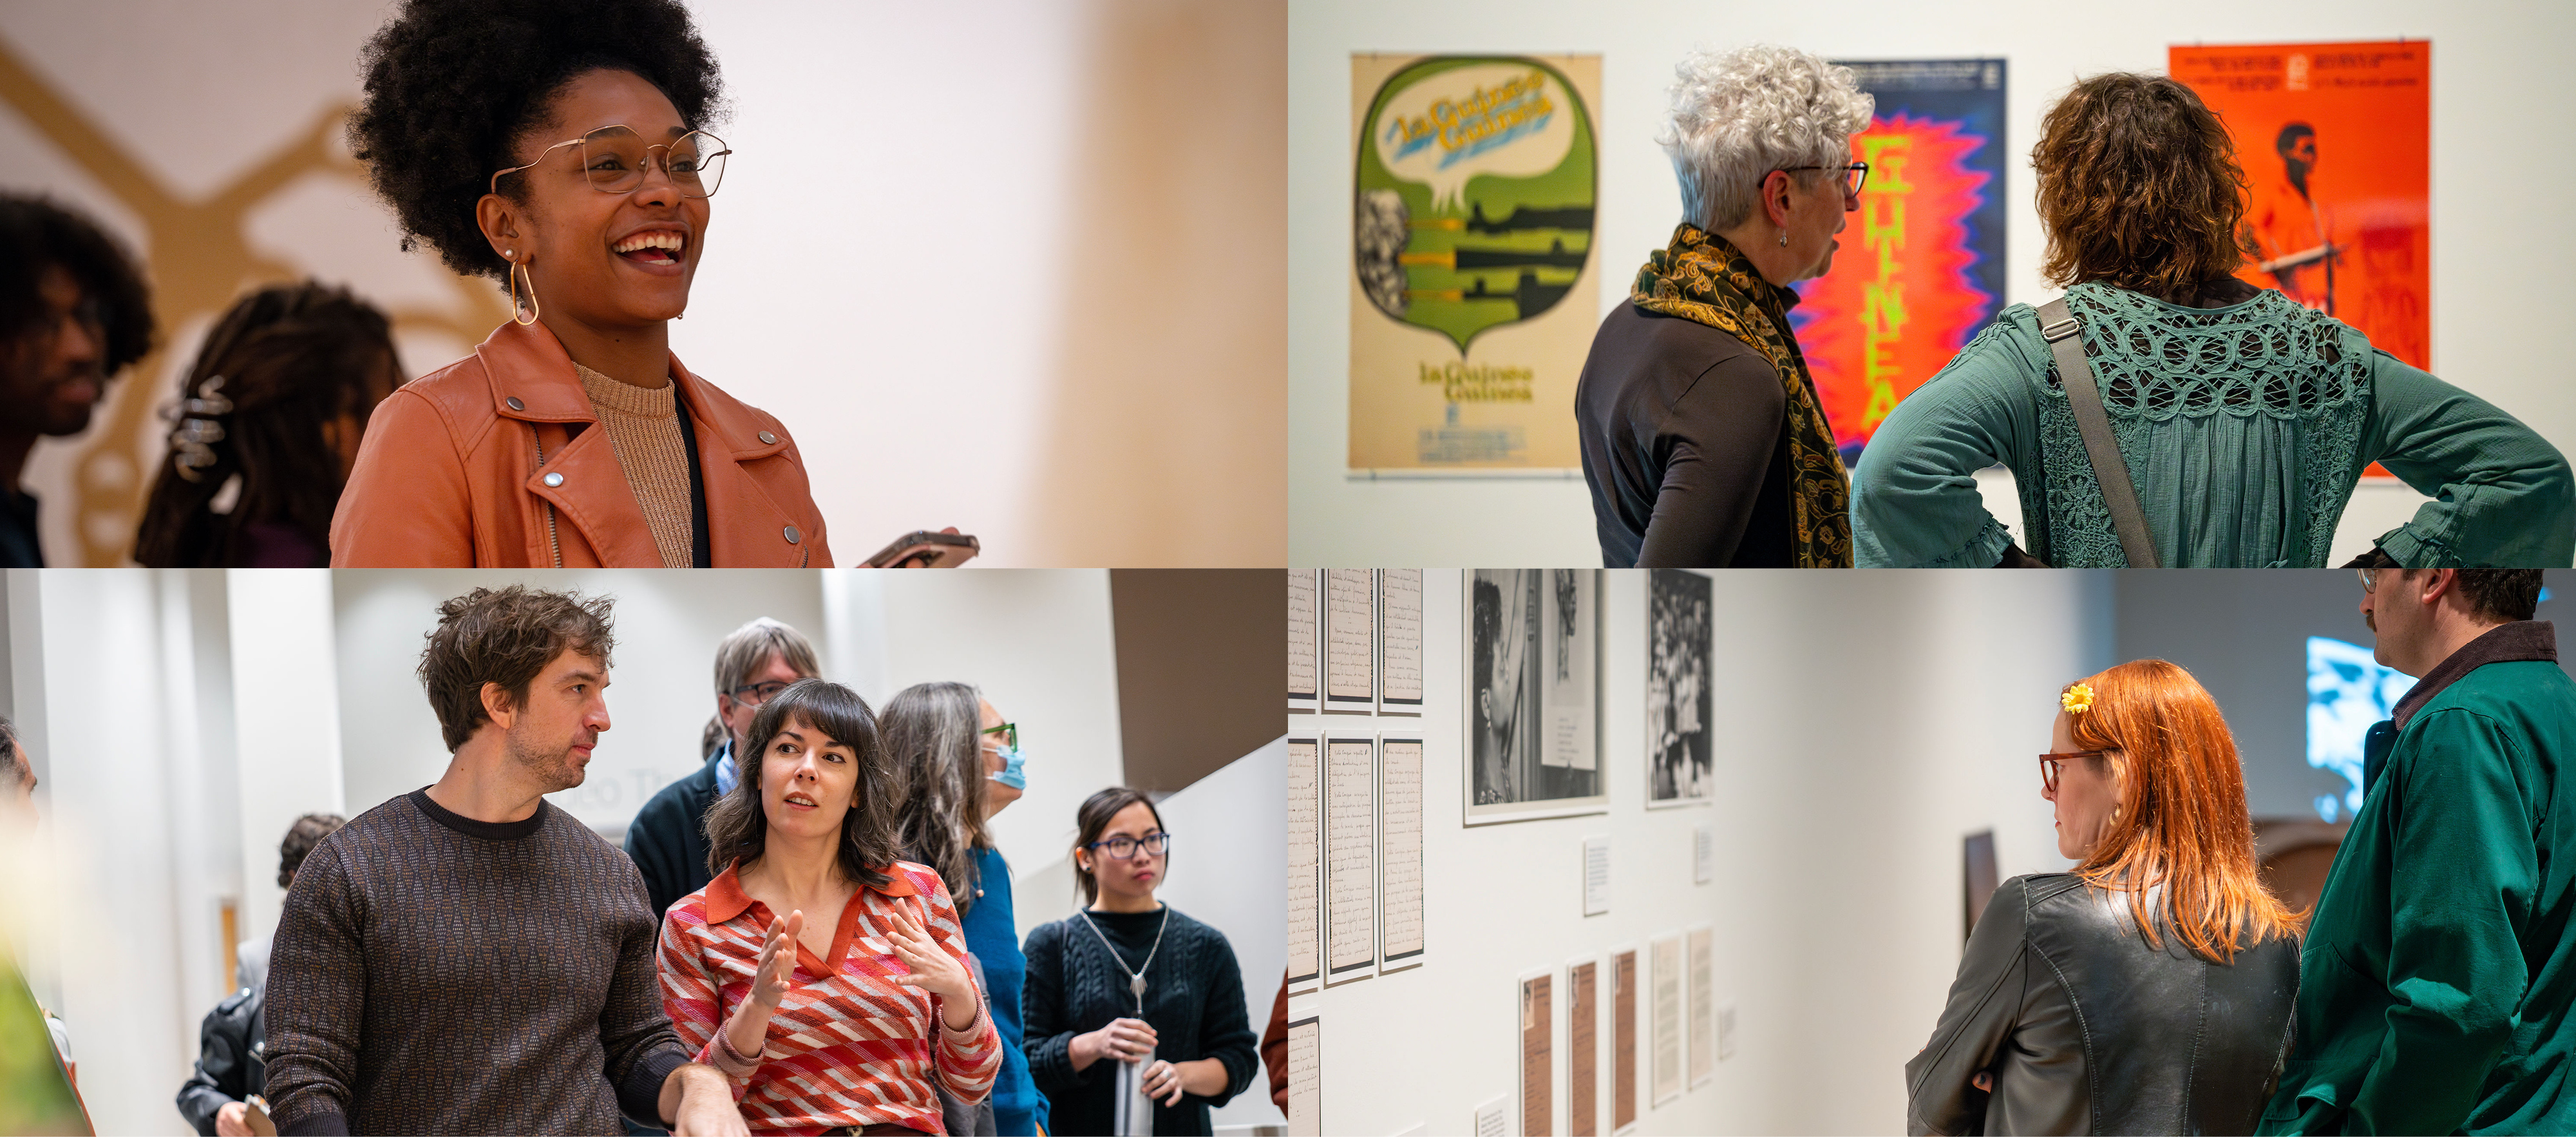 Collage image of people talking, looking at artwork, and enjoying an opening exhibition celebration at the Wexner Center for the Arts. 